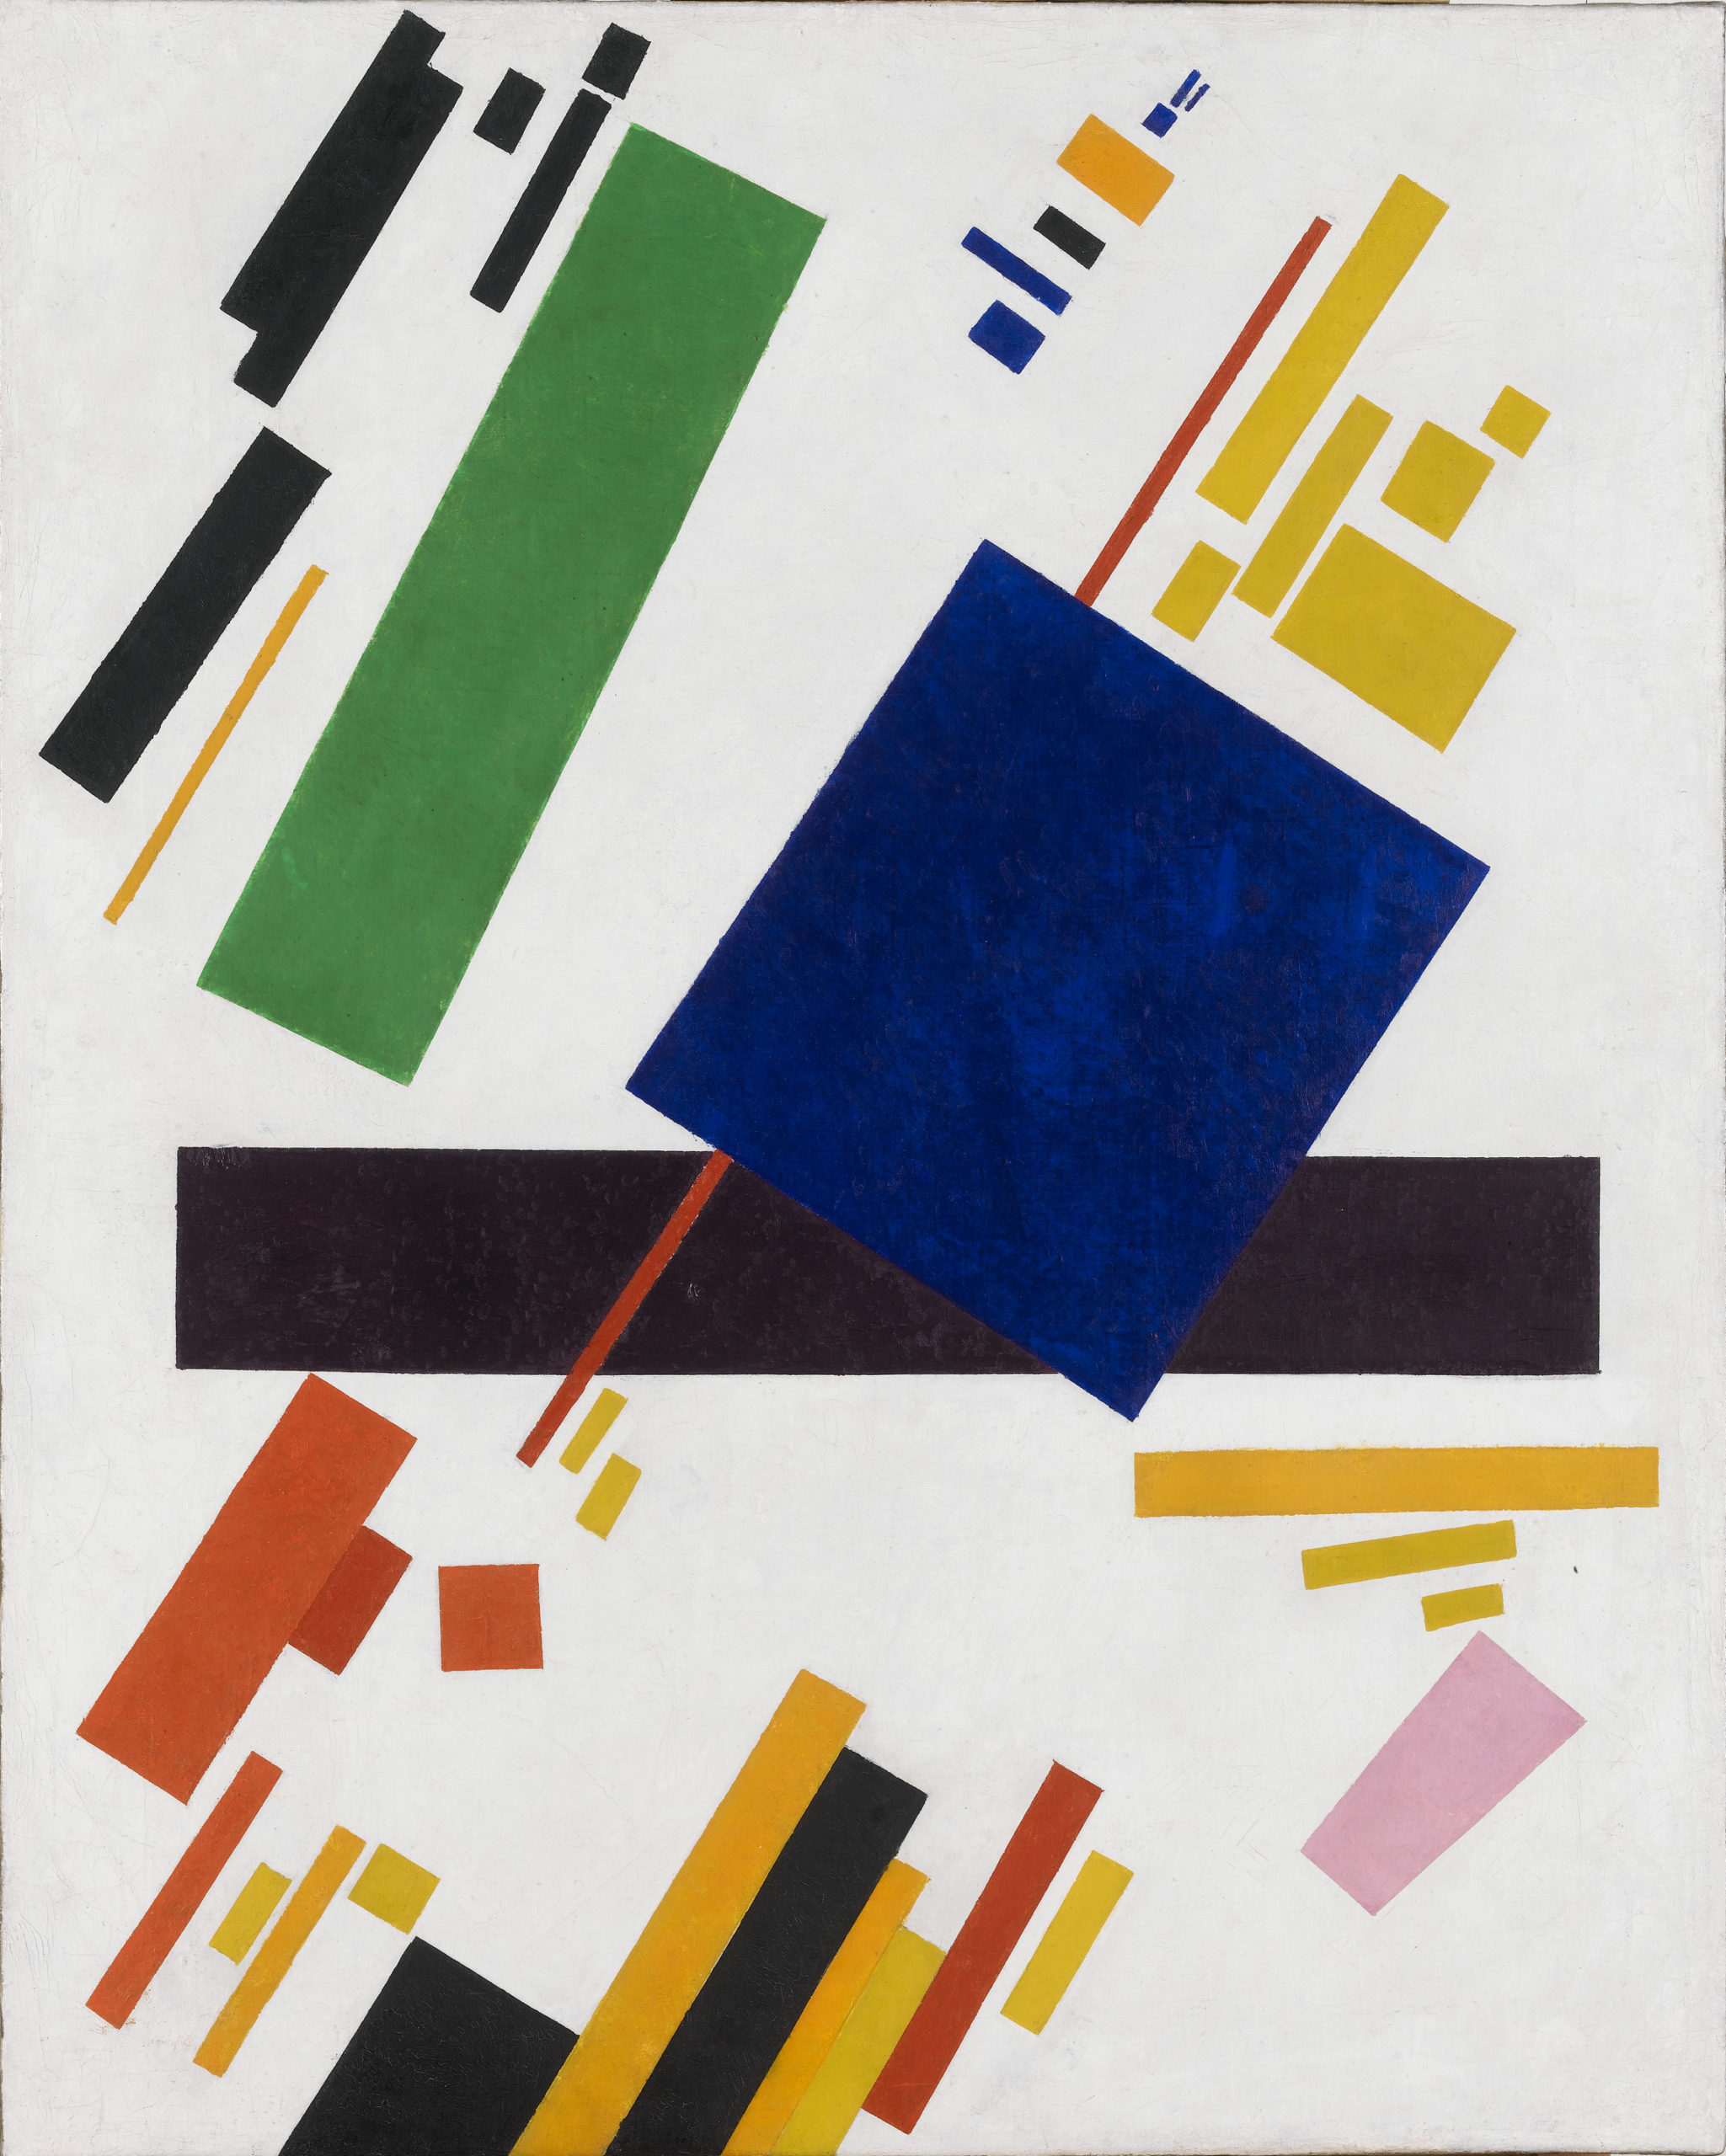 Kazimir Malevich, Suprematist Composition, 1915, oil on canvas, Private collection